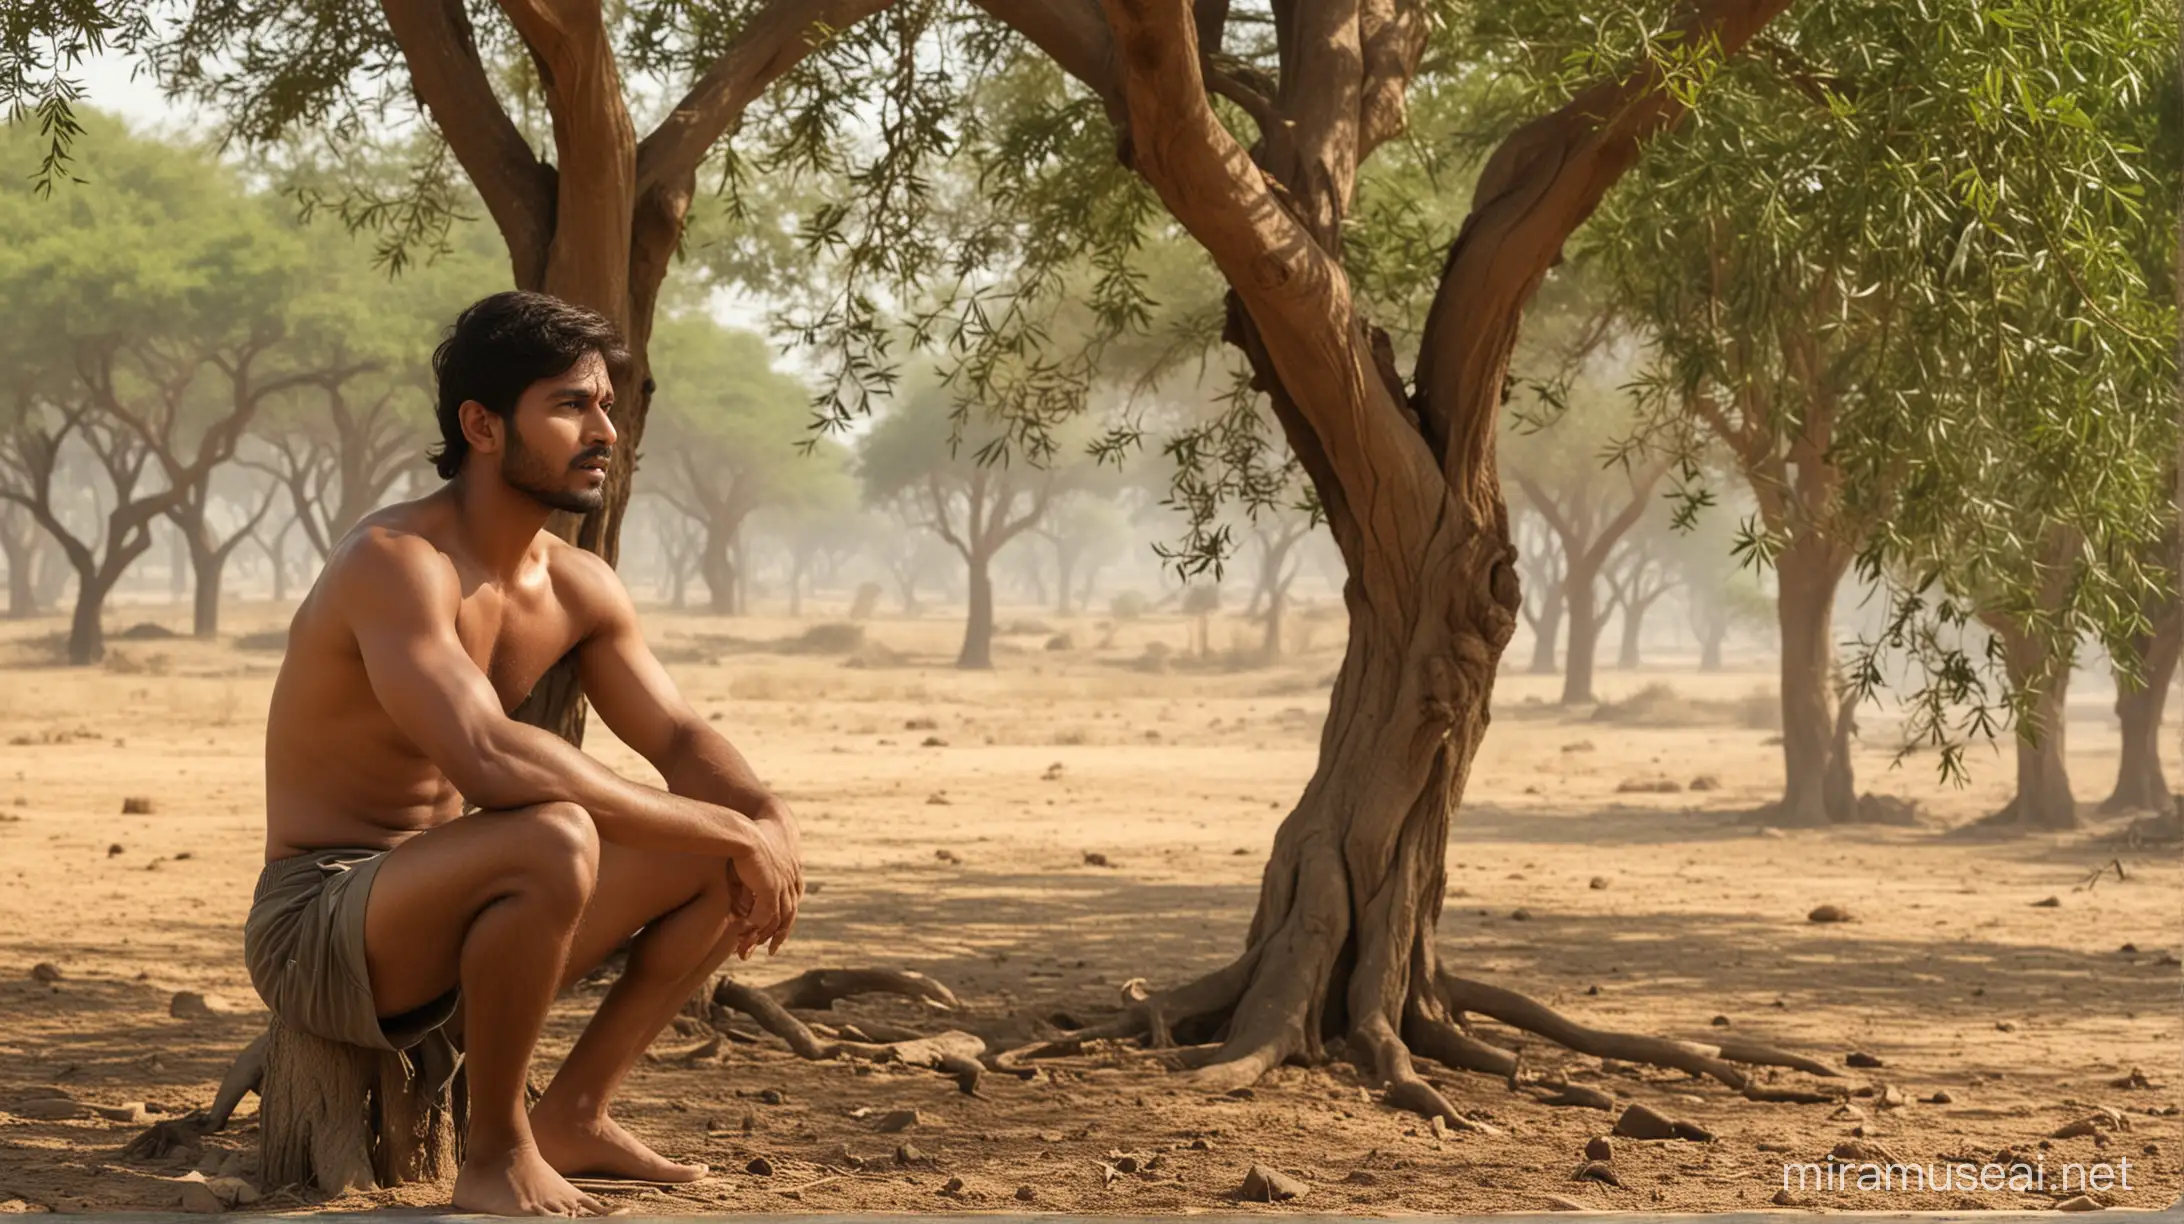 Indian one men who has tense emotion , and background was plan ground in which one tree is there and also very hot warm climate summar